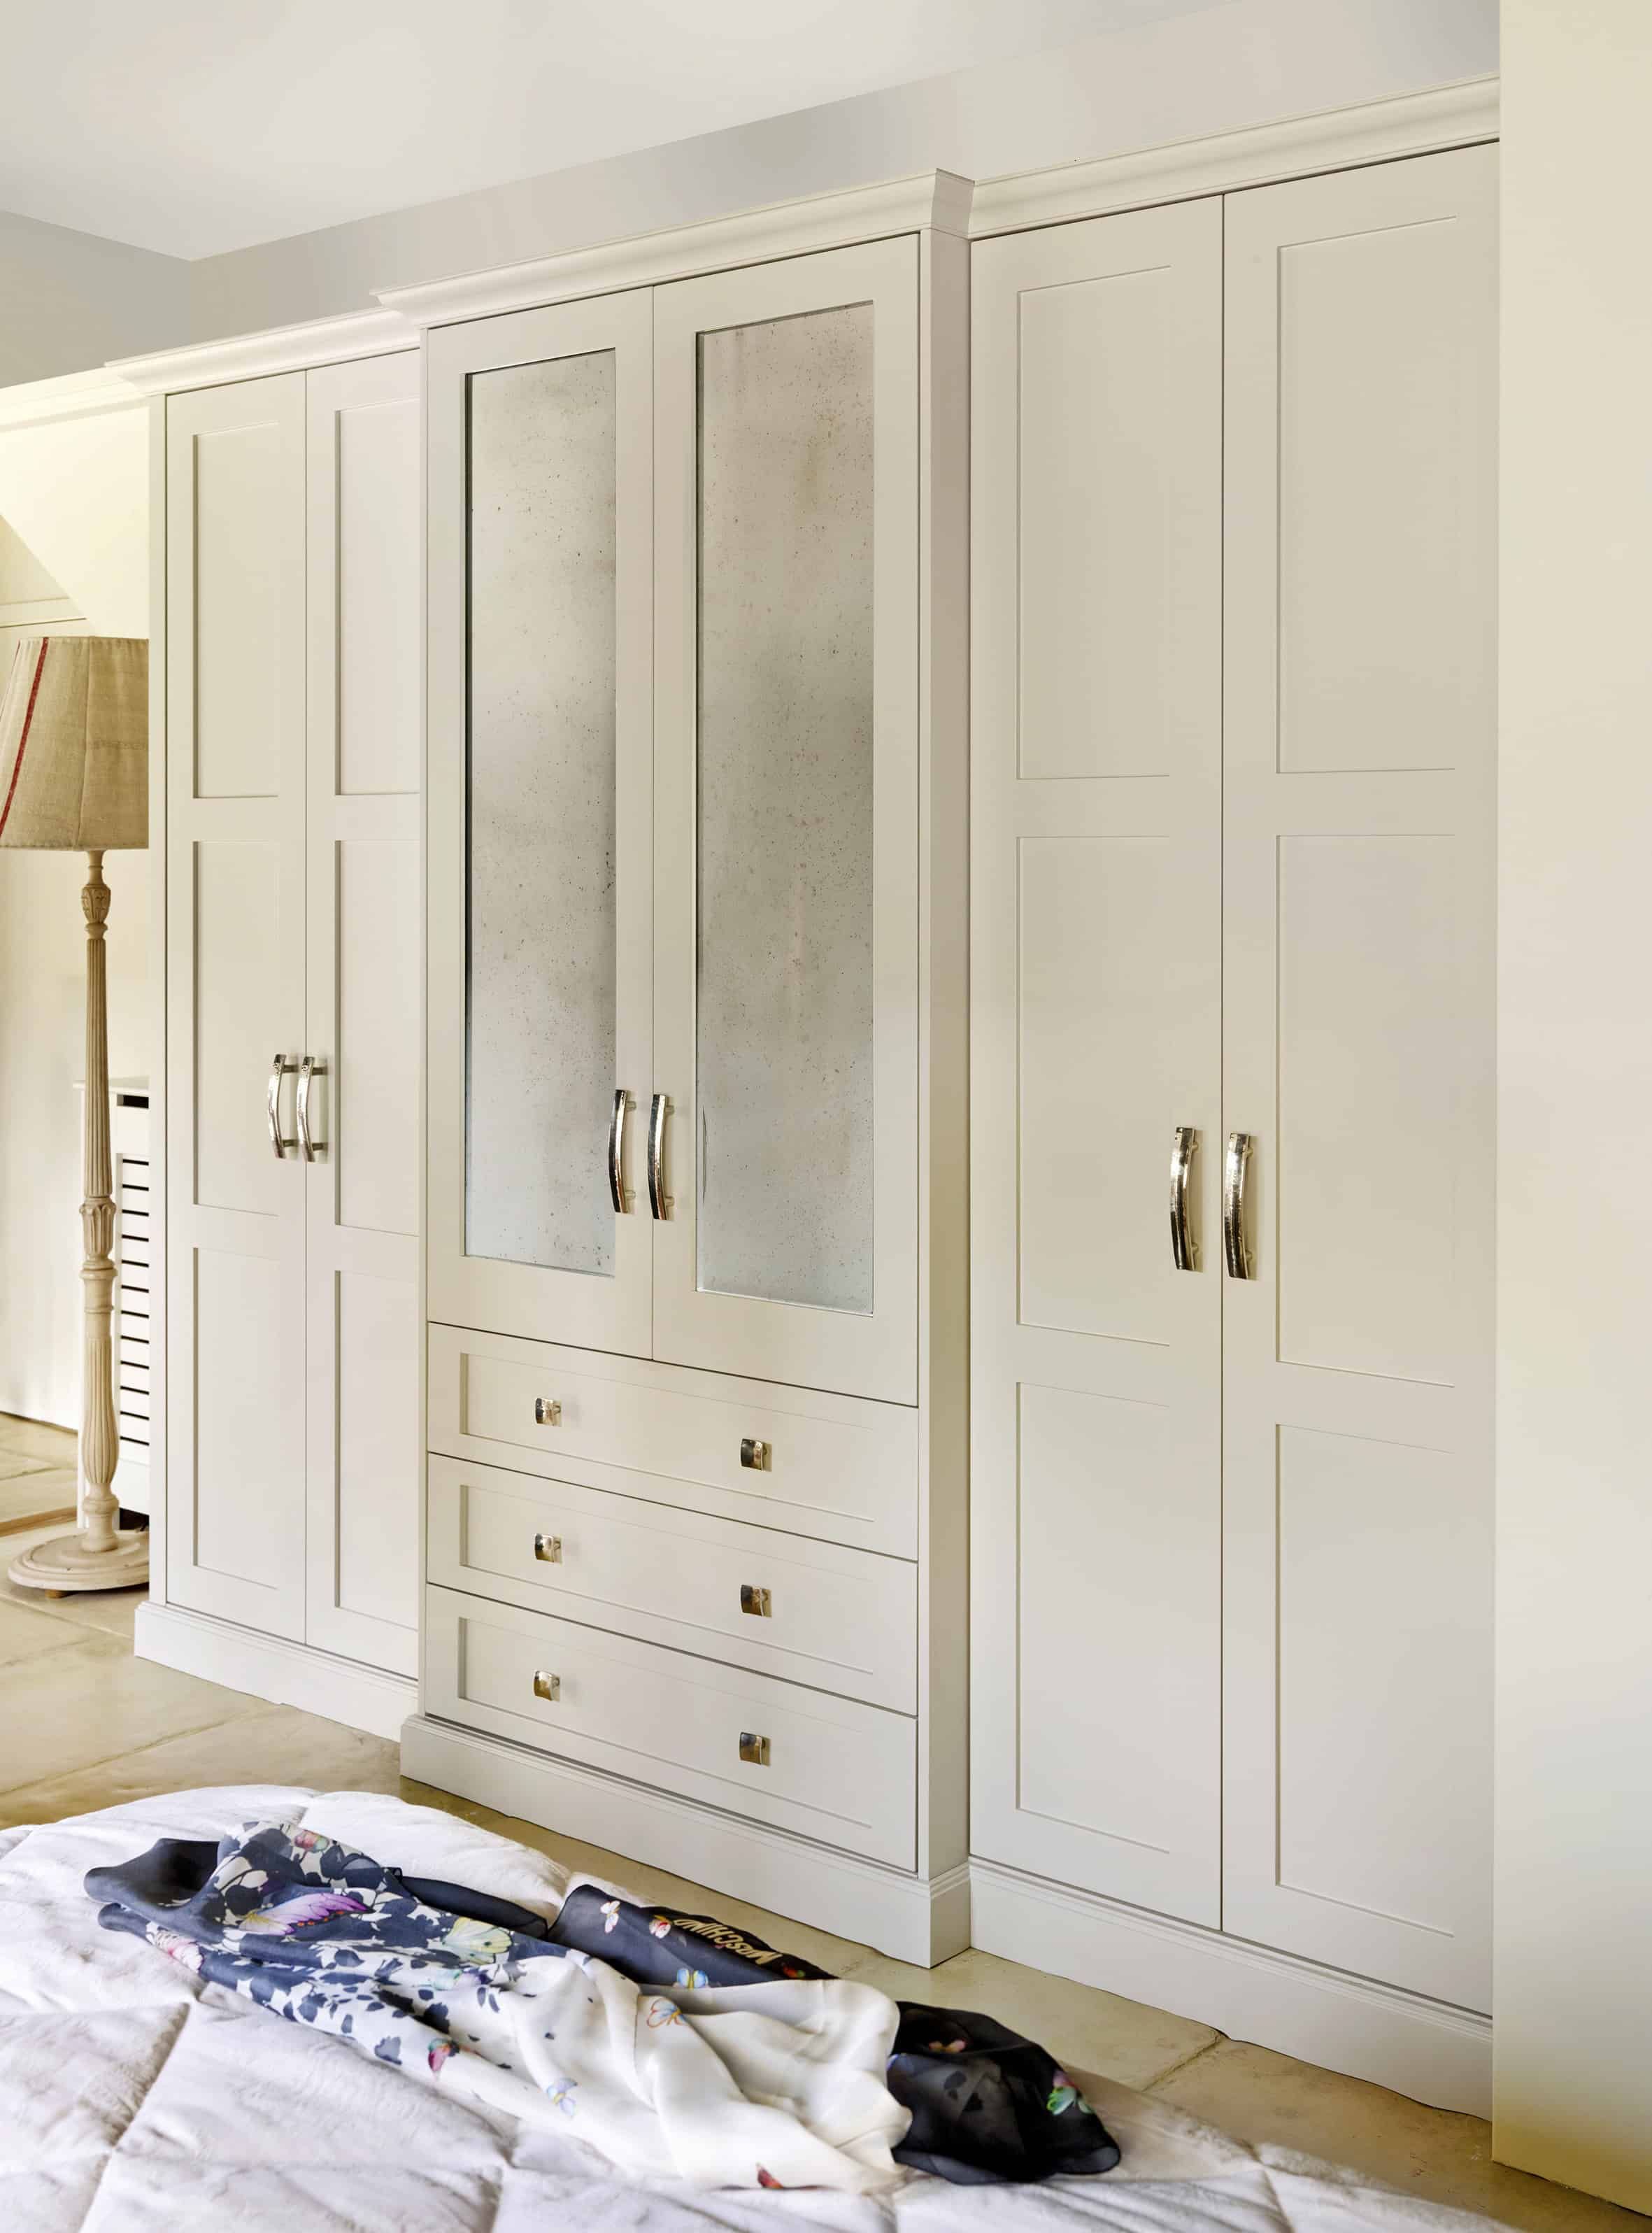 Bespoke Shaker Style Wardrobes | John Lewis Of Hungerford For Traditional Wardrobes (View 13 of 15)